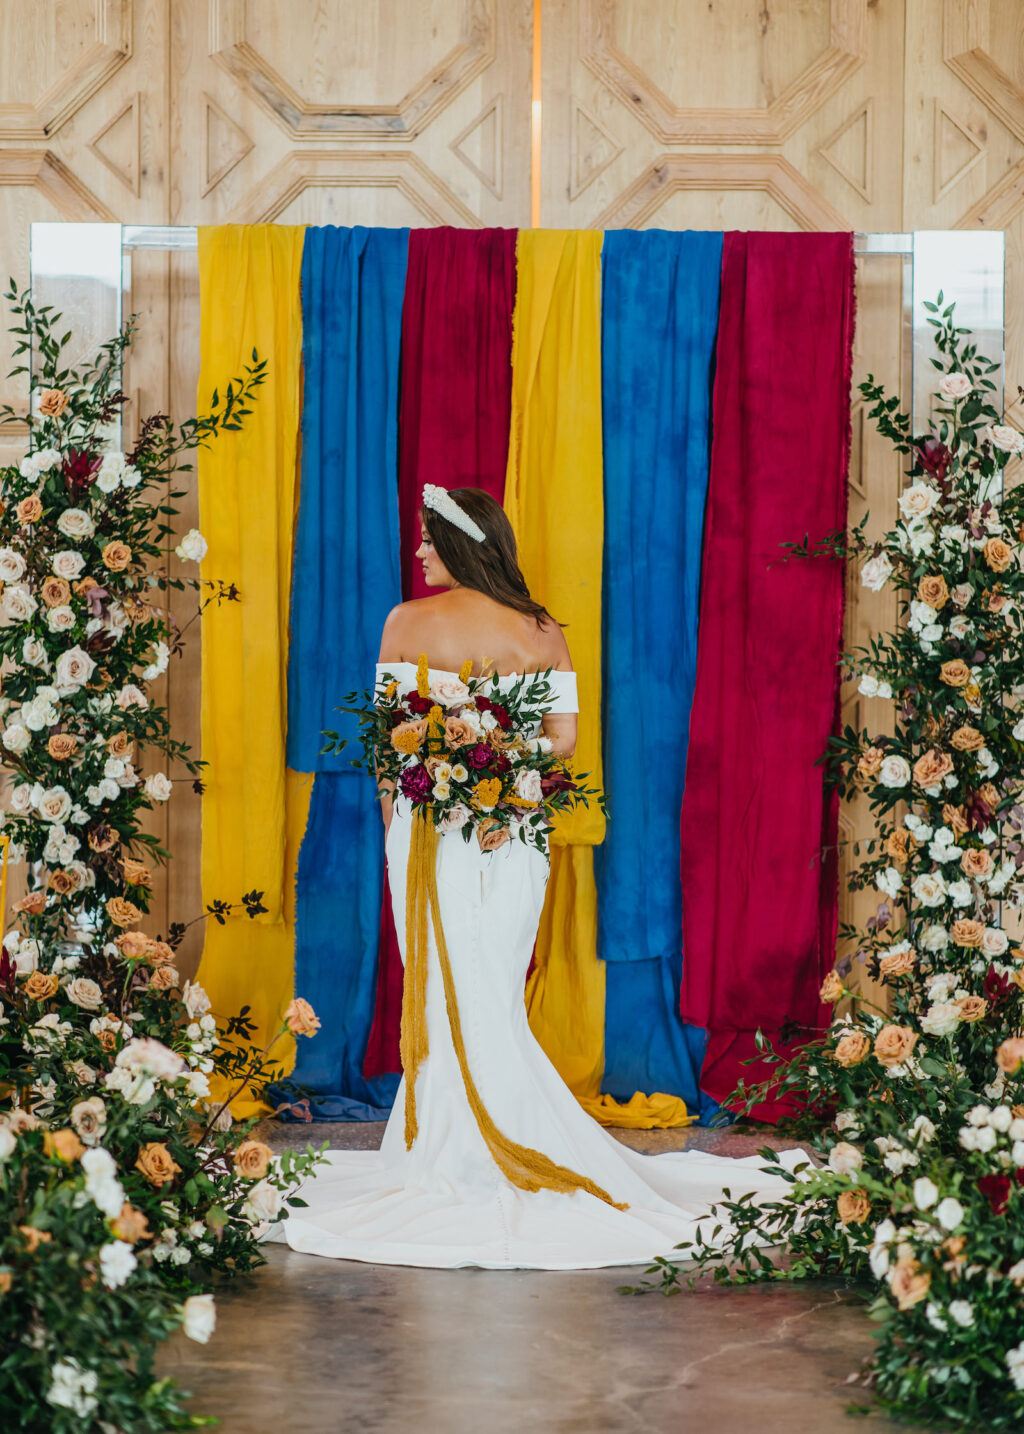 Modern and Edgy Fall Wedding Decor, Bride Wearing Off the Shoulder Fitted Wedding Dress Holding Burgundy Red, and Yellow Floral Bouquet with Mustard Yellow Linen Hanging, Chic Gold Chairs, Greenery and Blush Pink, White and Mauve Roses Floral Arrangements Two Part Standing Floral Ceremony Arch, Primary Colors Yellow, Blue and Red Linen Draping | South Tampa Wedding Venue Hyde House